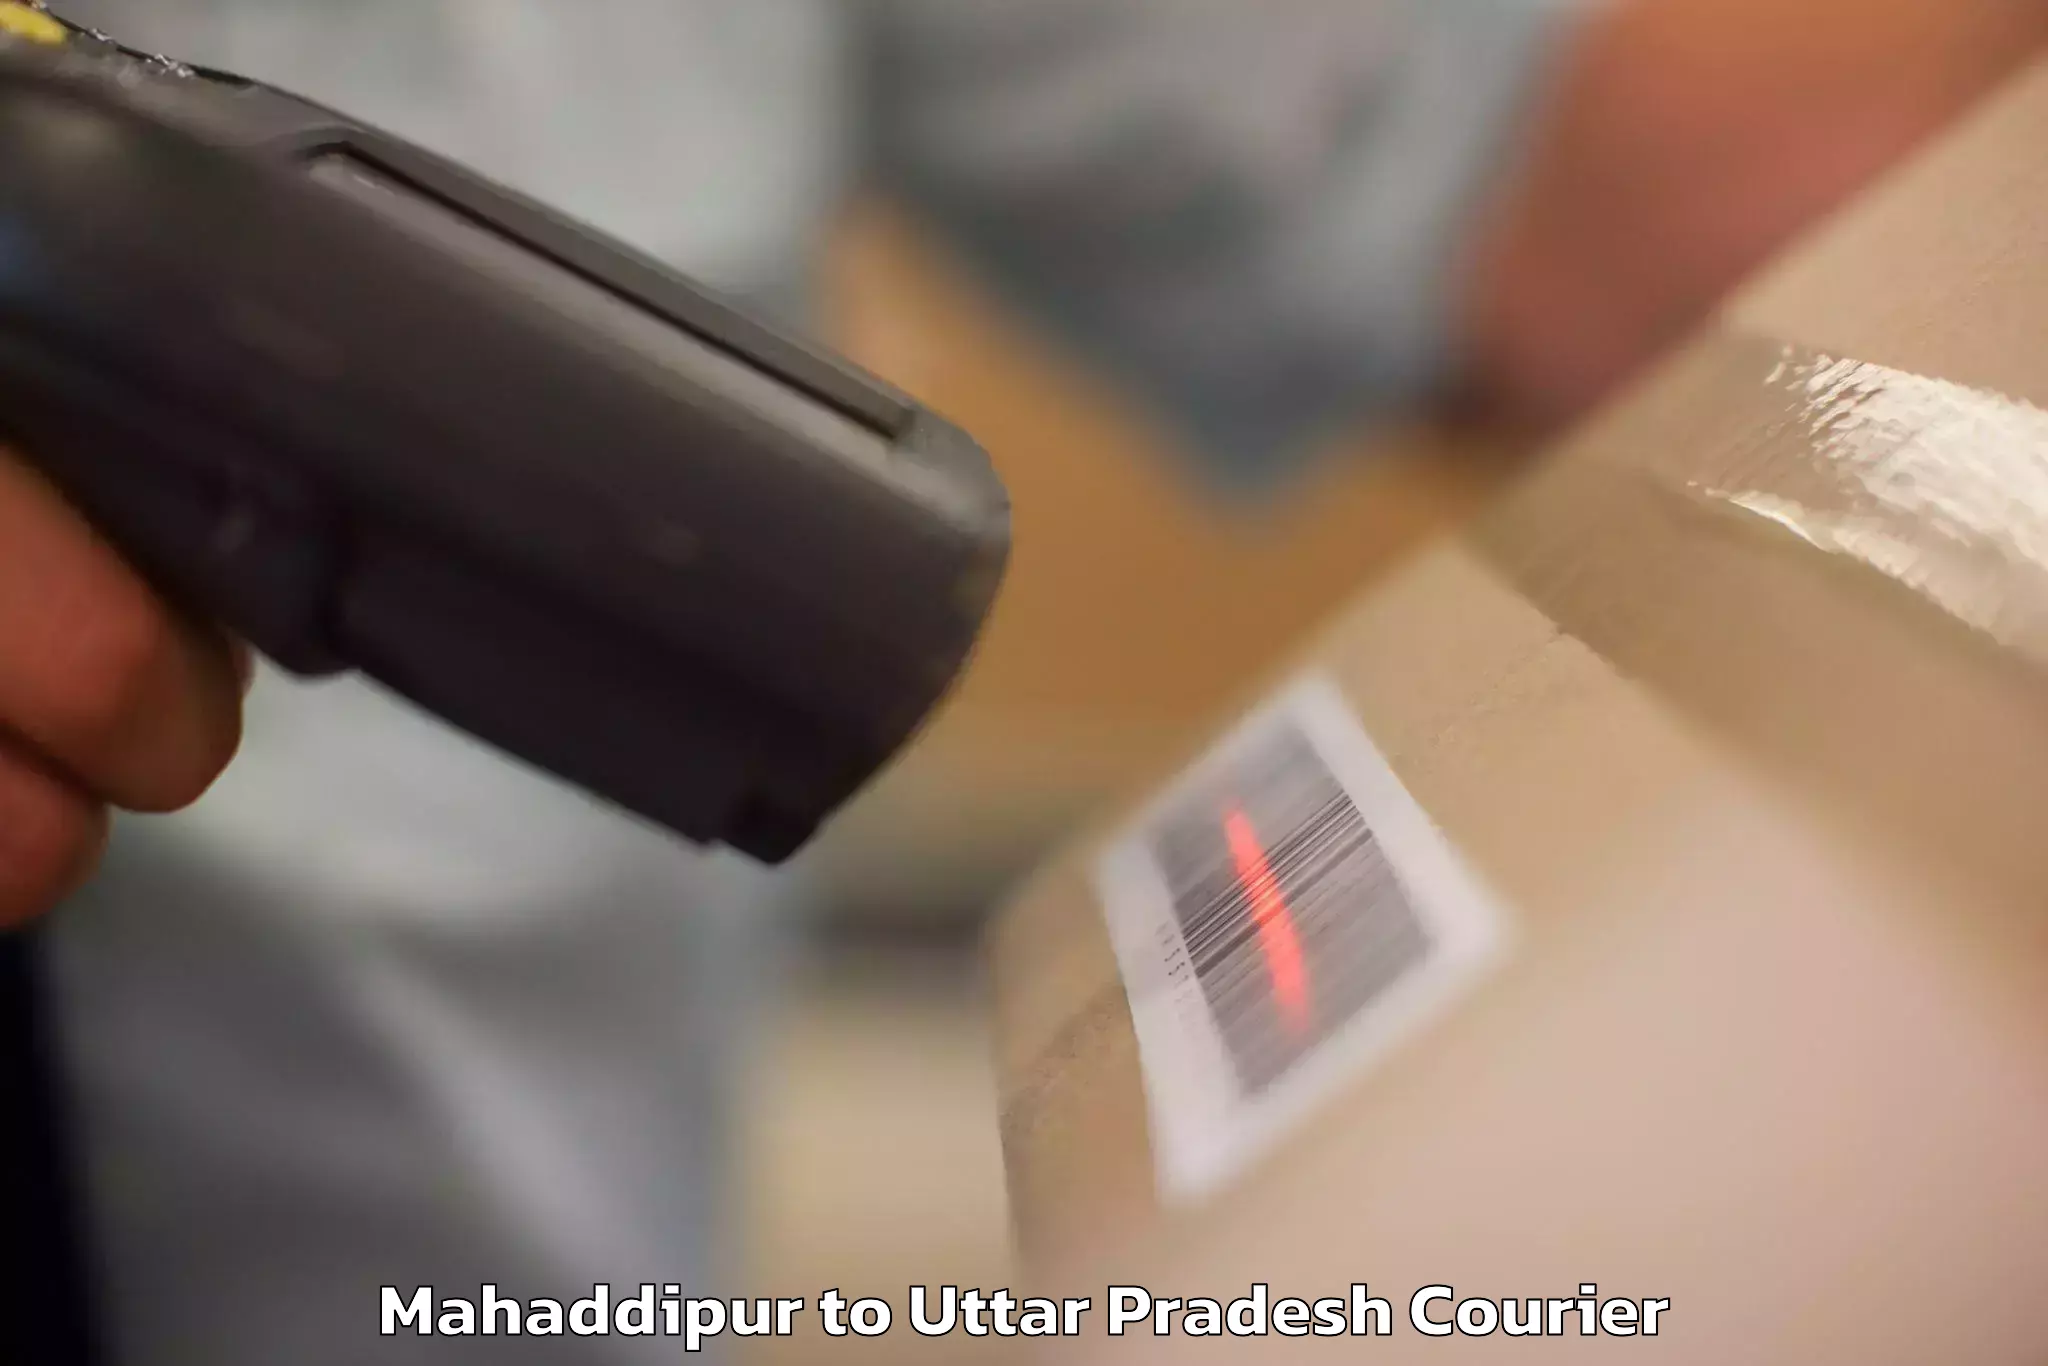 Reliable luggage courier Mahaddipur to Agra